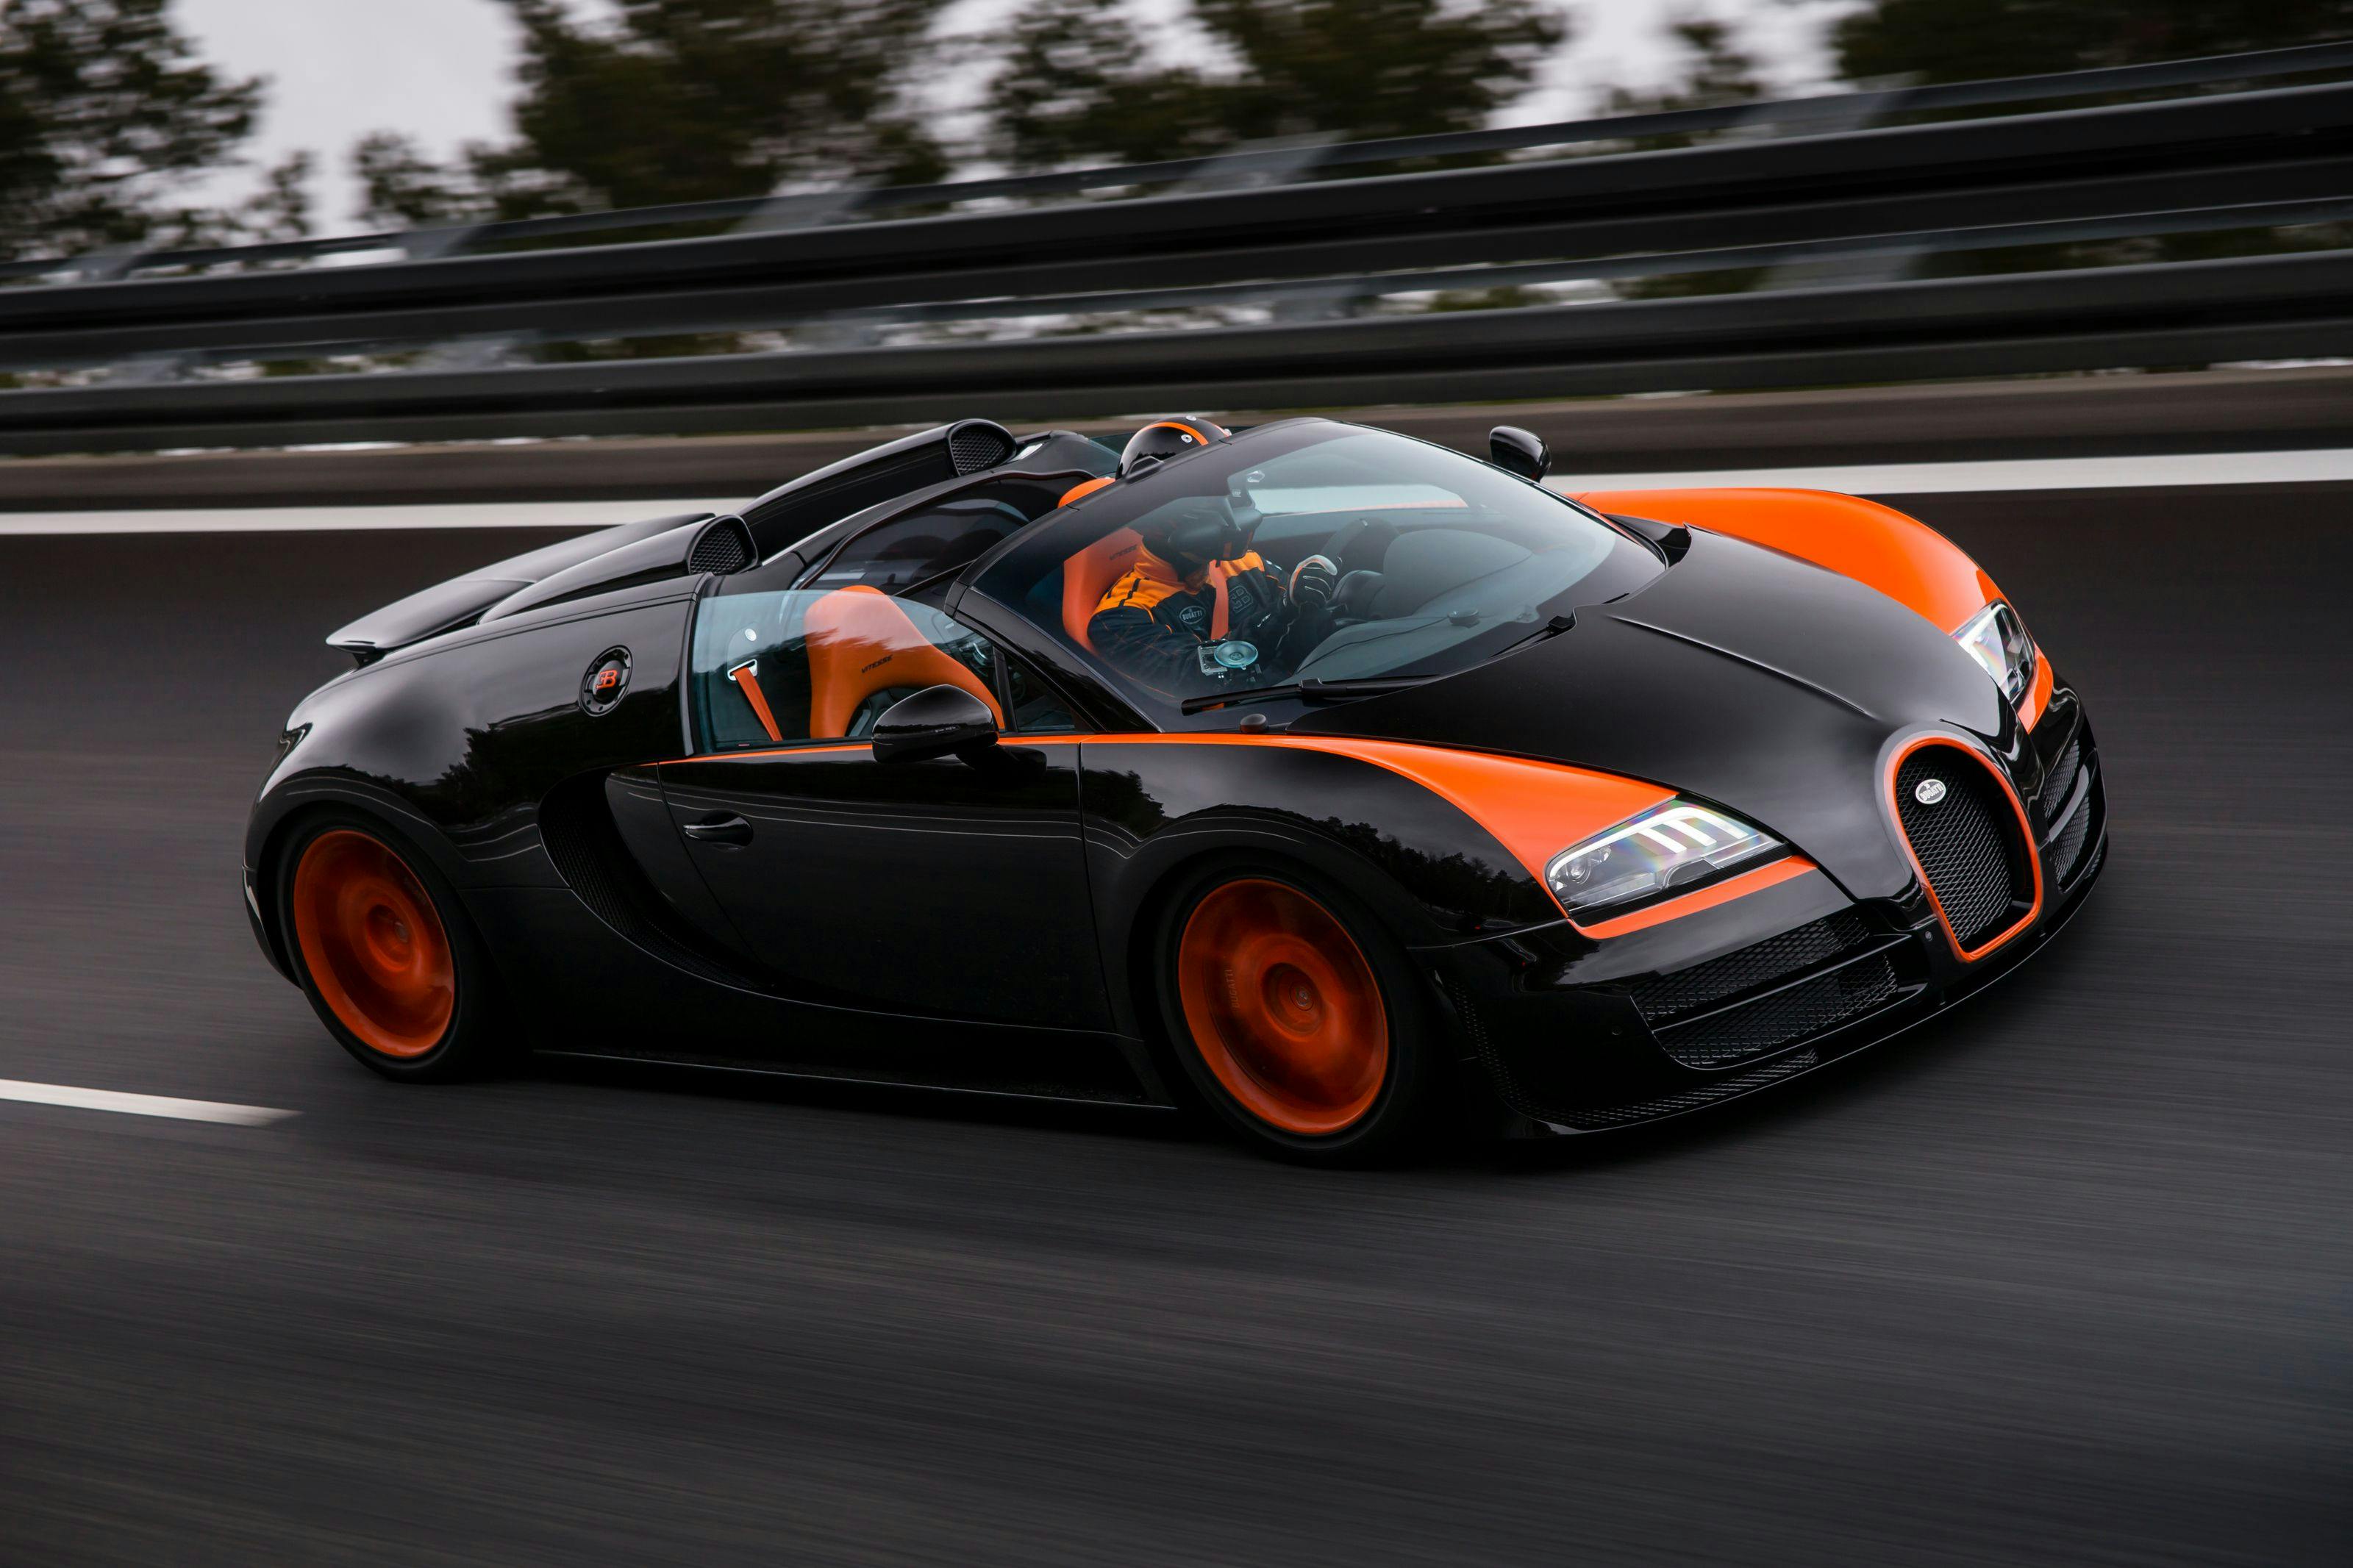 408.84 km/h: Bugatti Veyron 16.4 Grand Sport Vitesse sets world speed record for open-top production sports cars